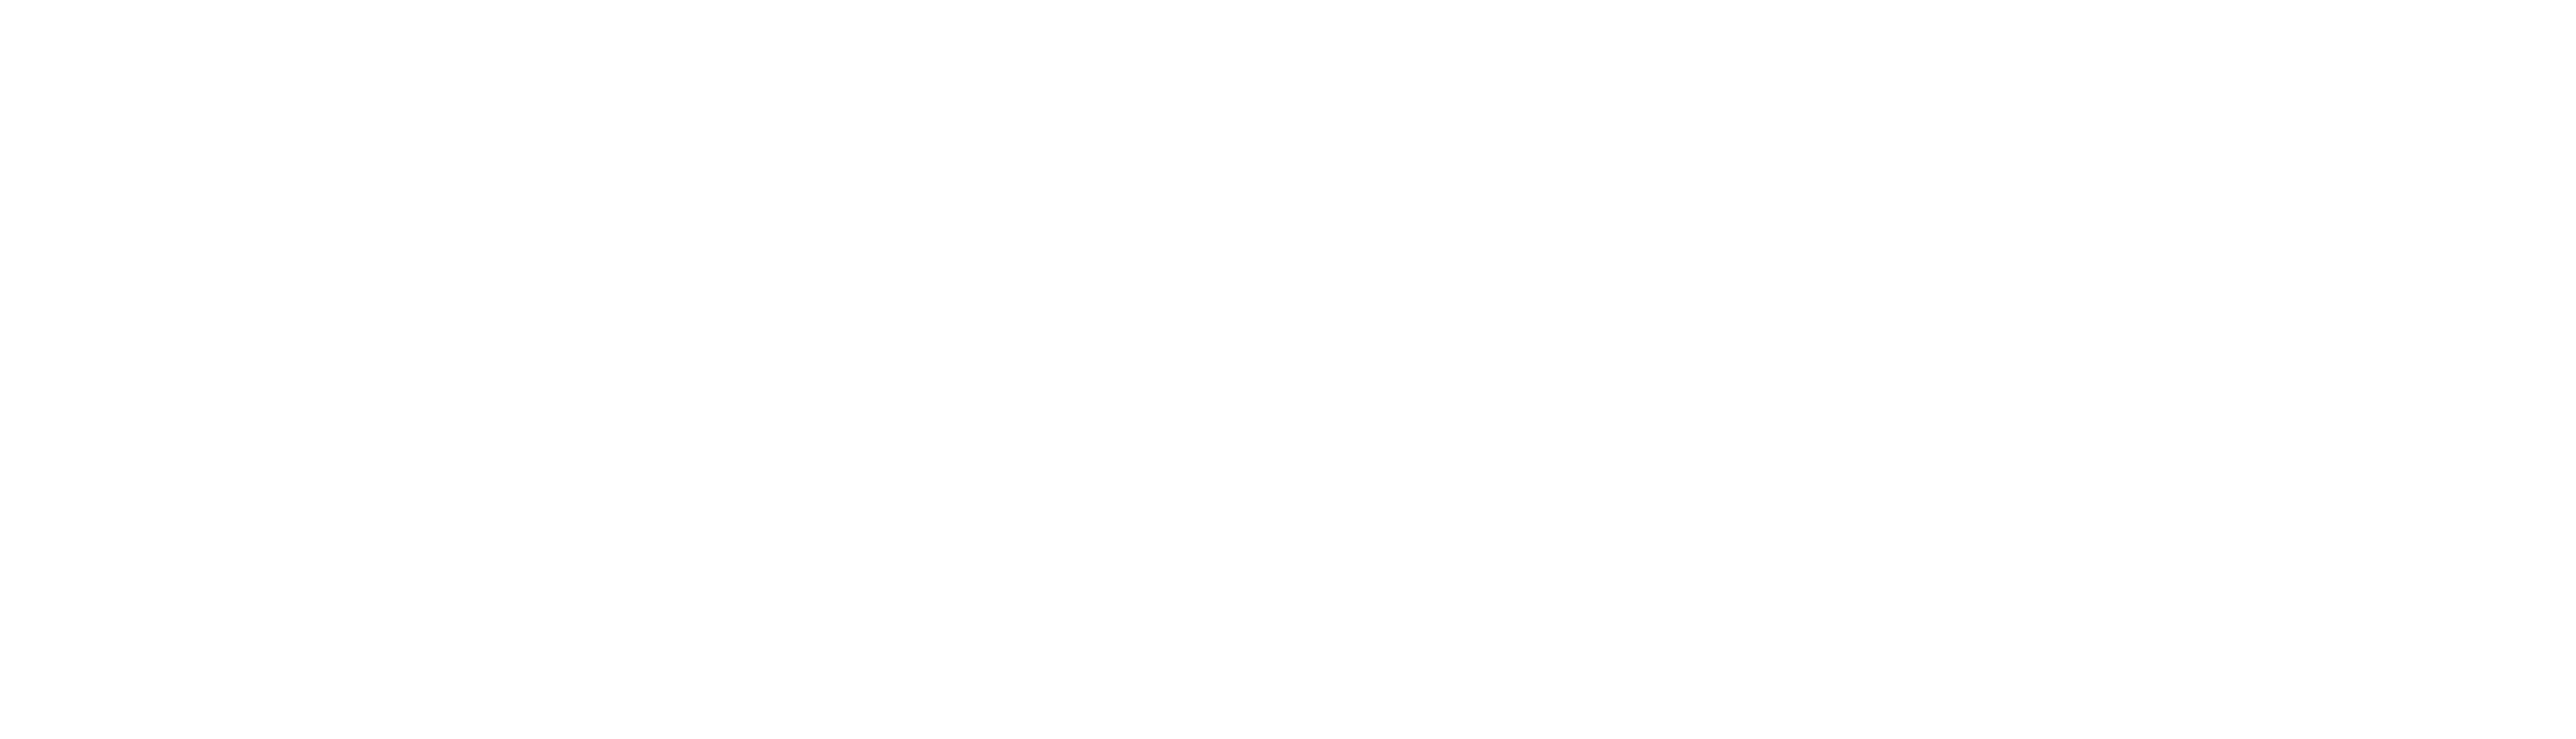 Gardele Business Solutions